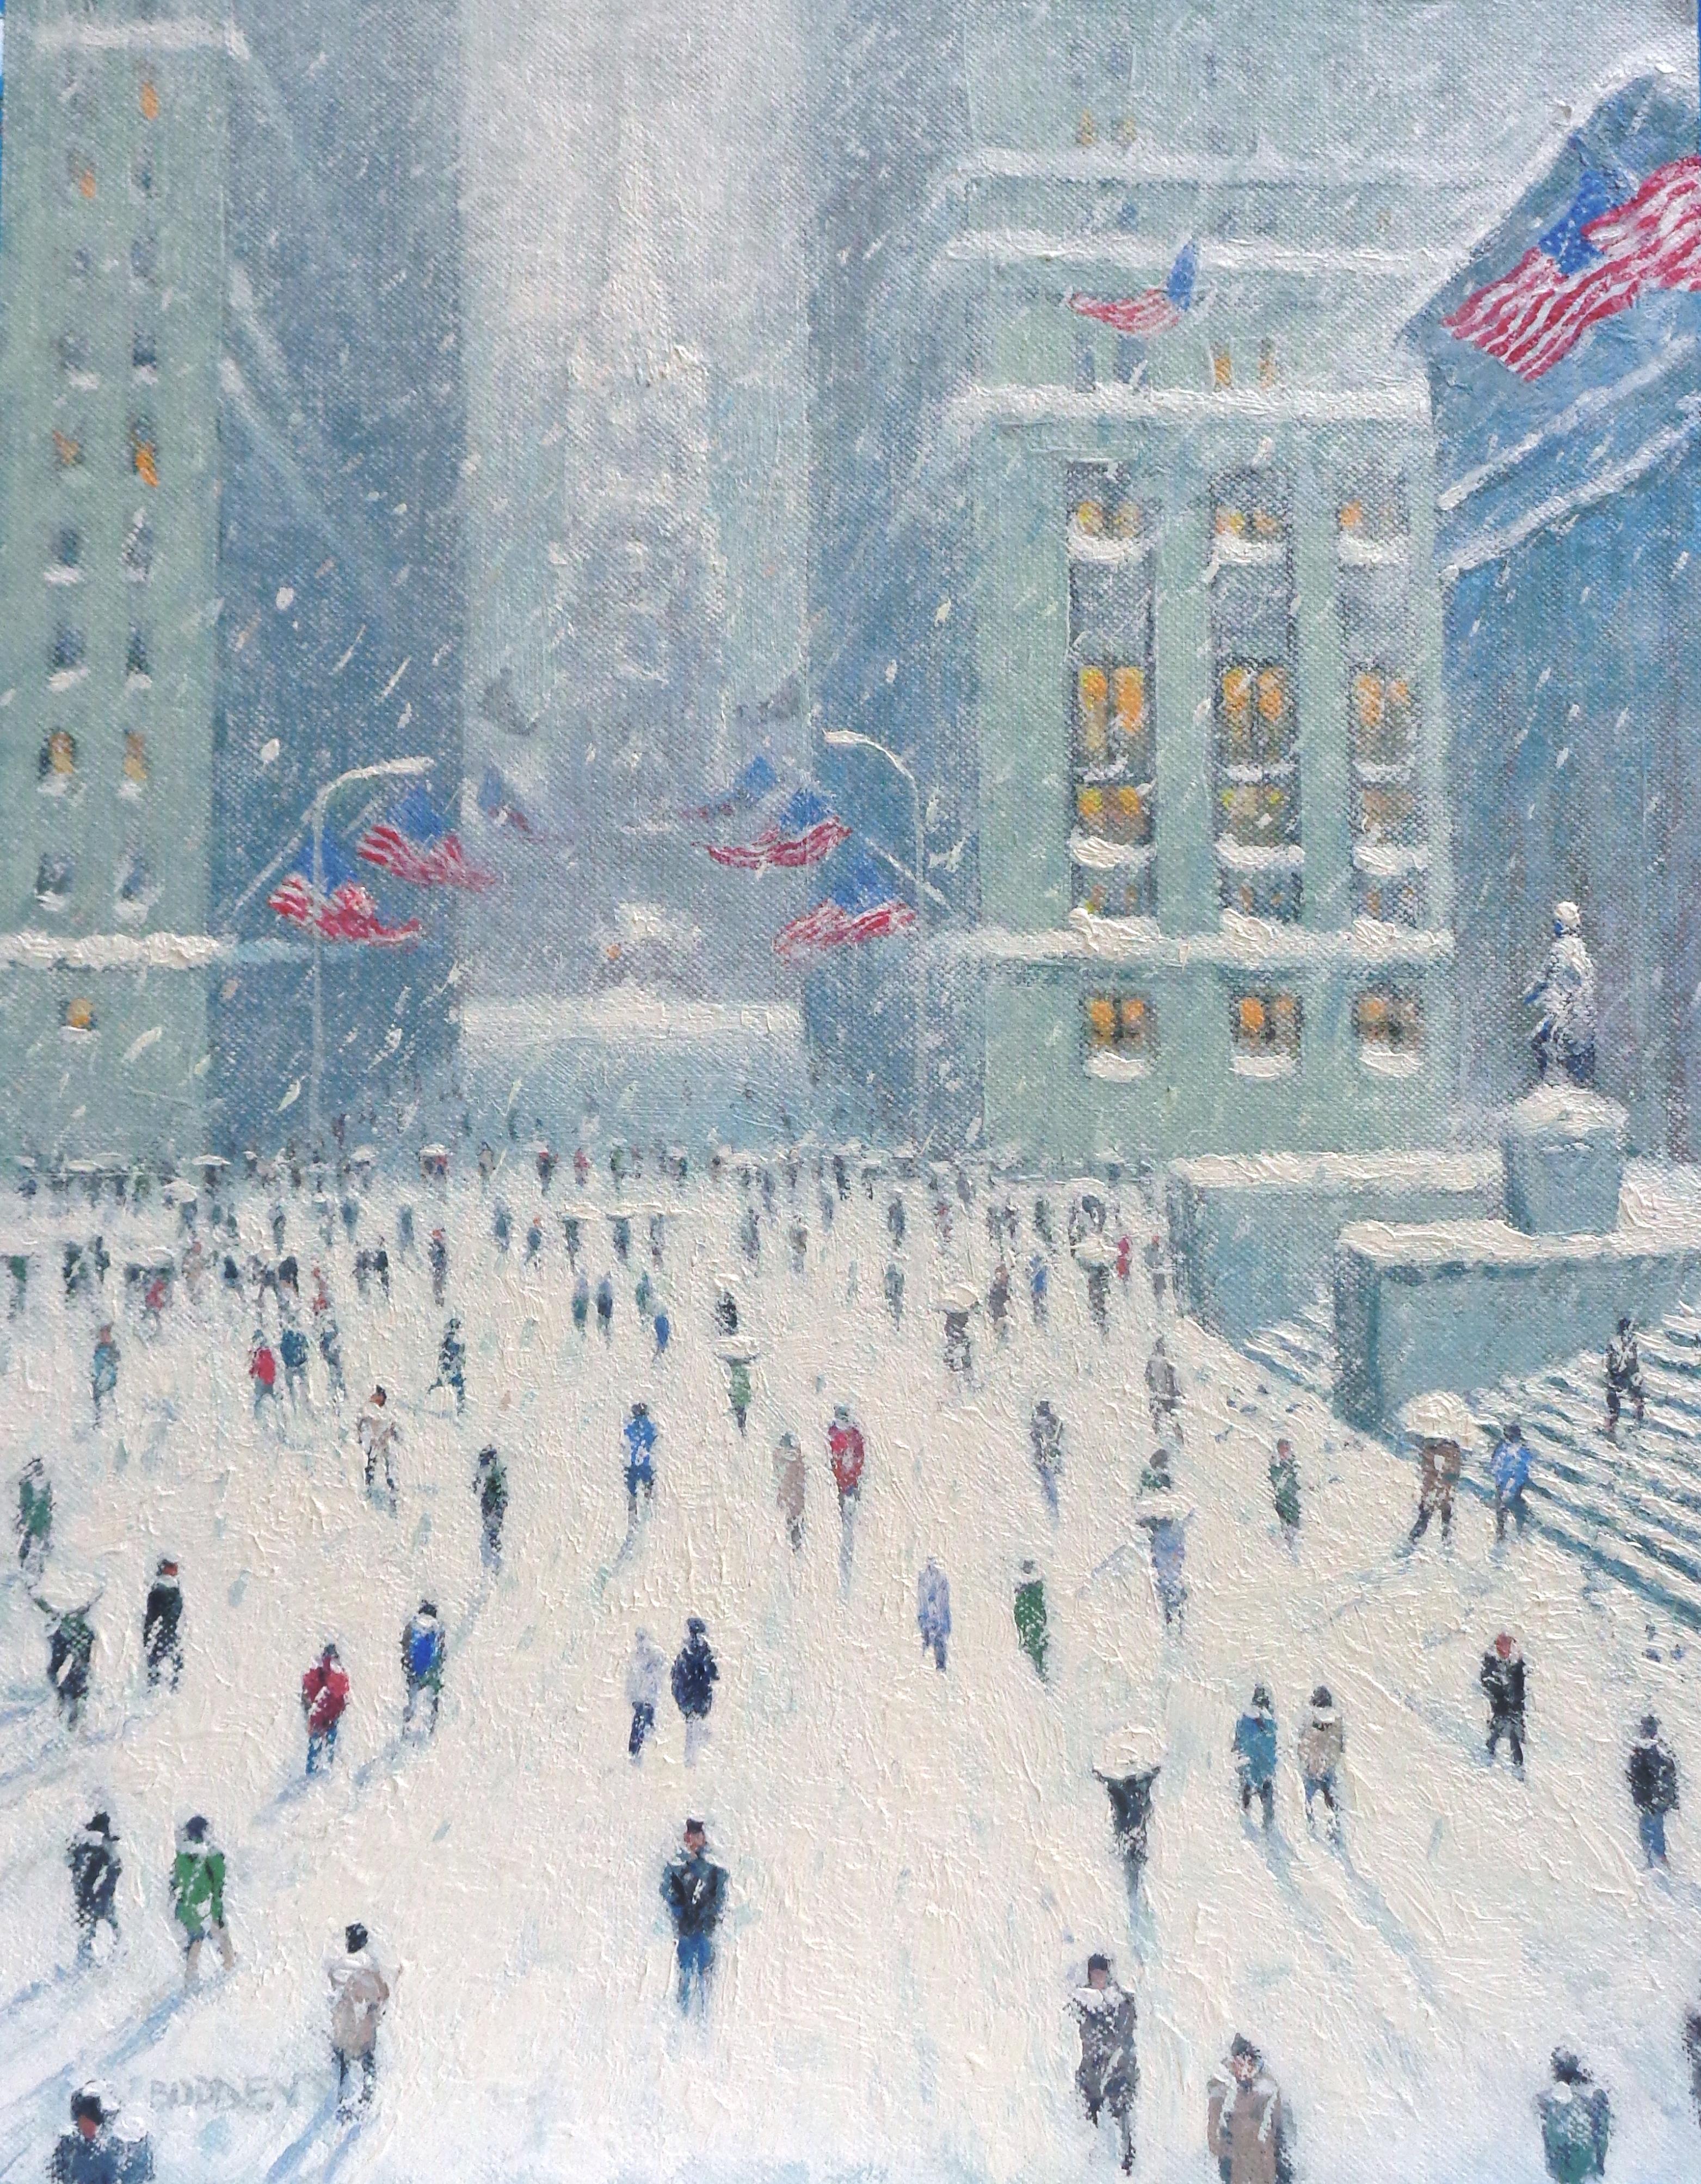  New York City Winter Wall Street Flags Oil Painting by Michael Budden 1